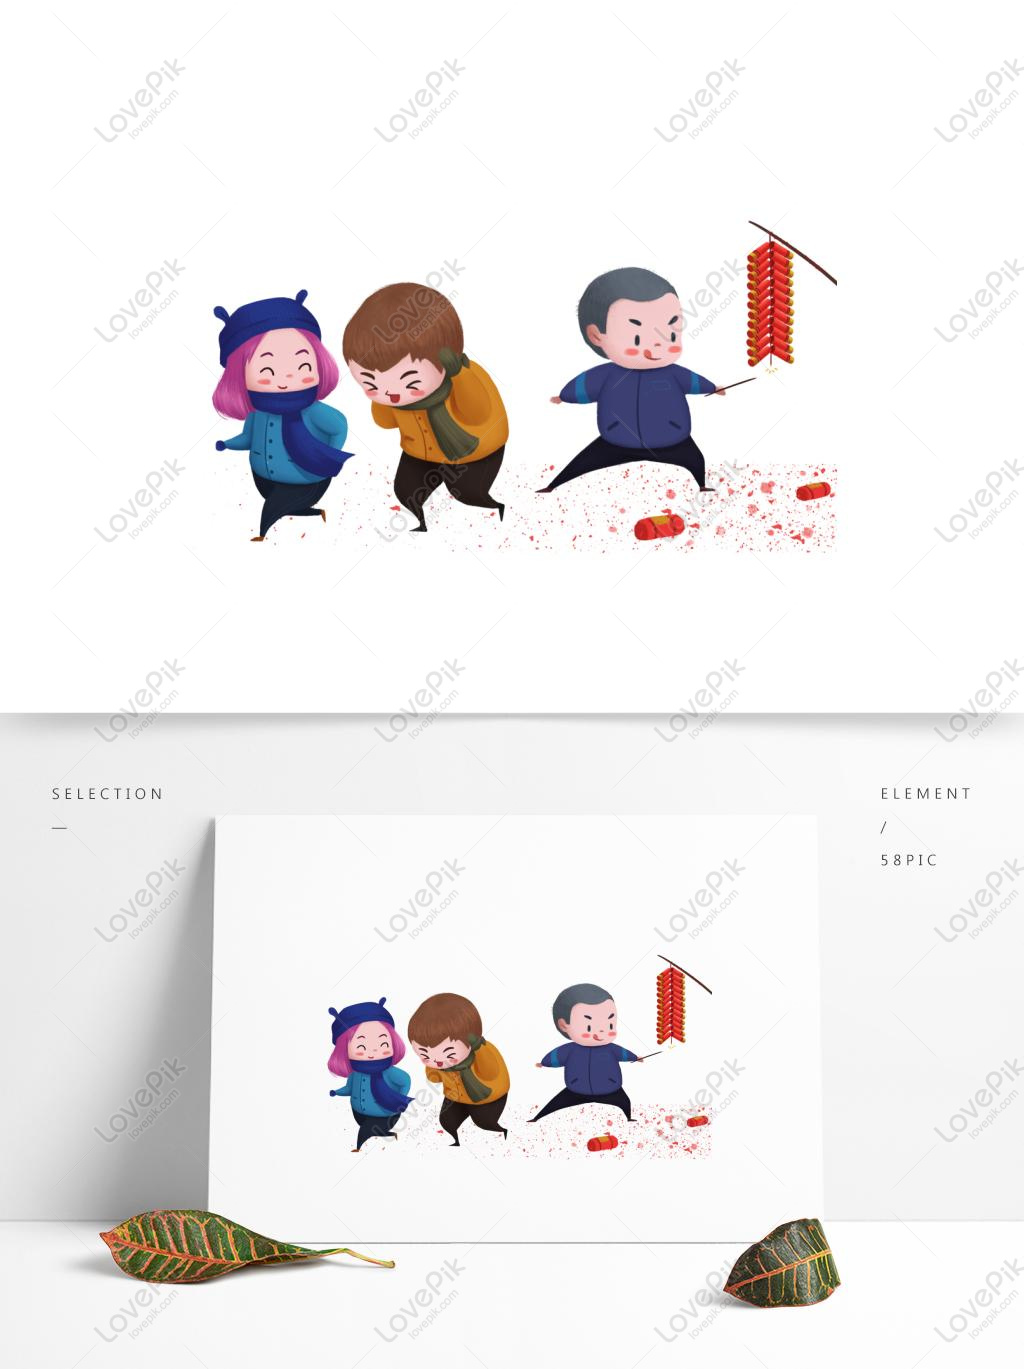 Cartoon Hand Drawn Three Little Kids Playing Firecrackers Psd Images Free Download 1369 1024 Px Lovepik Id 733445573